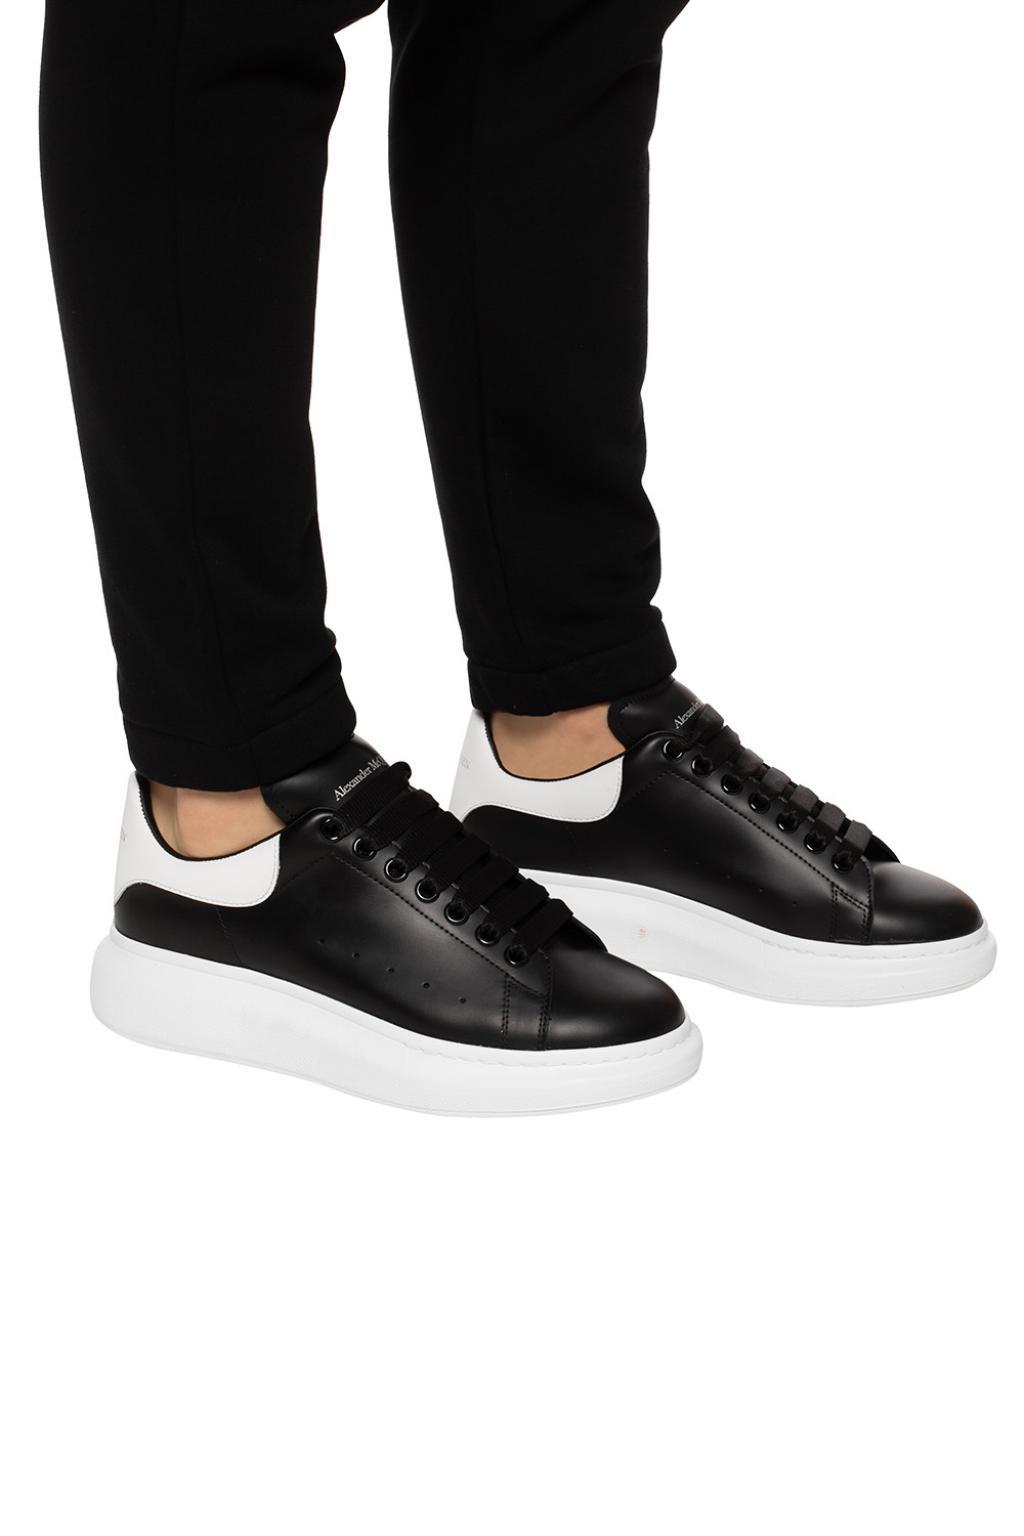 Alexander McQueen Leather Oversized Sole Sneakers Black/white for Men -  Save 35% - Lyst